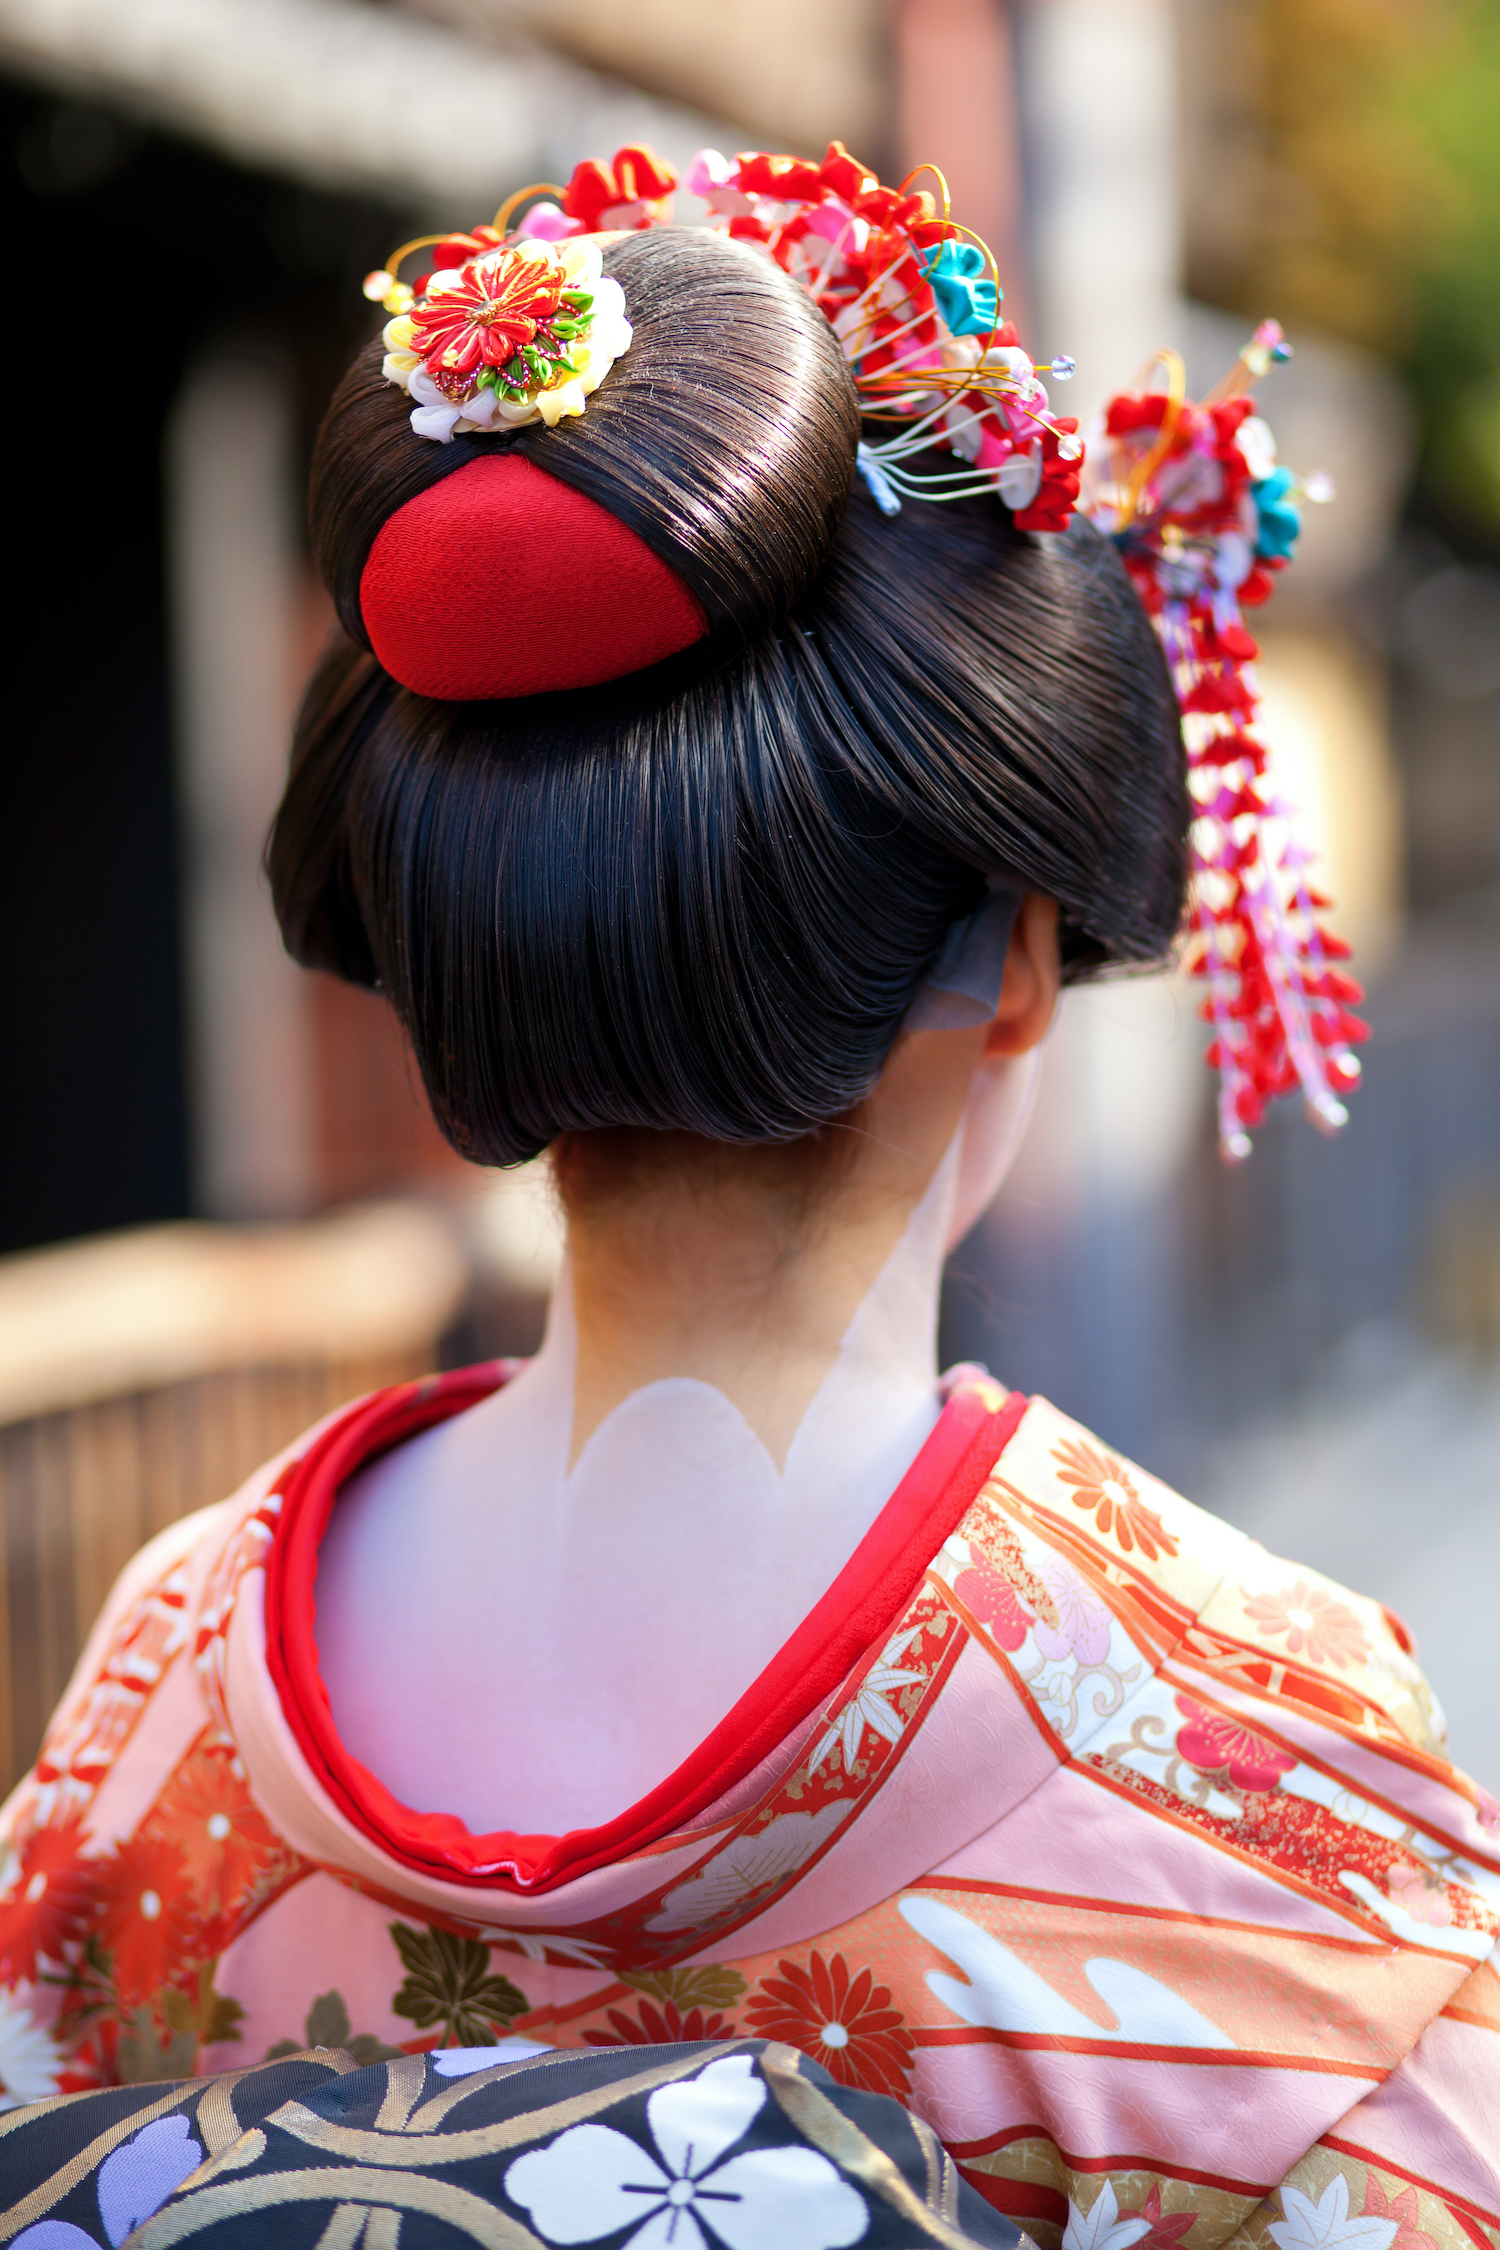 Momoware - traditional hairstyle of a young Maiko